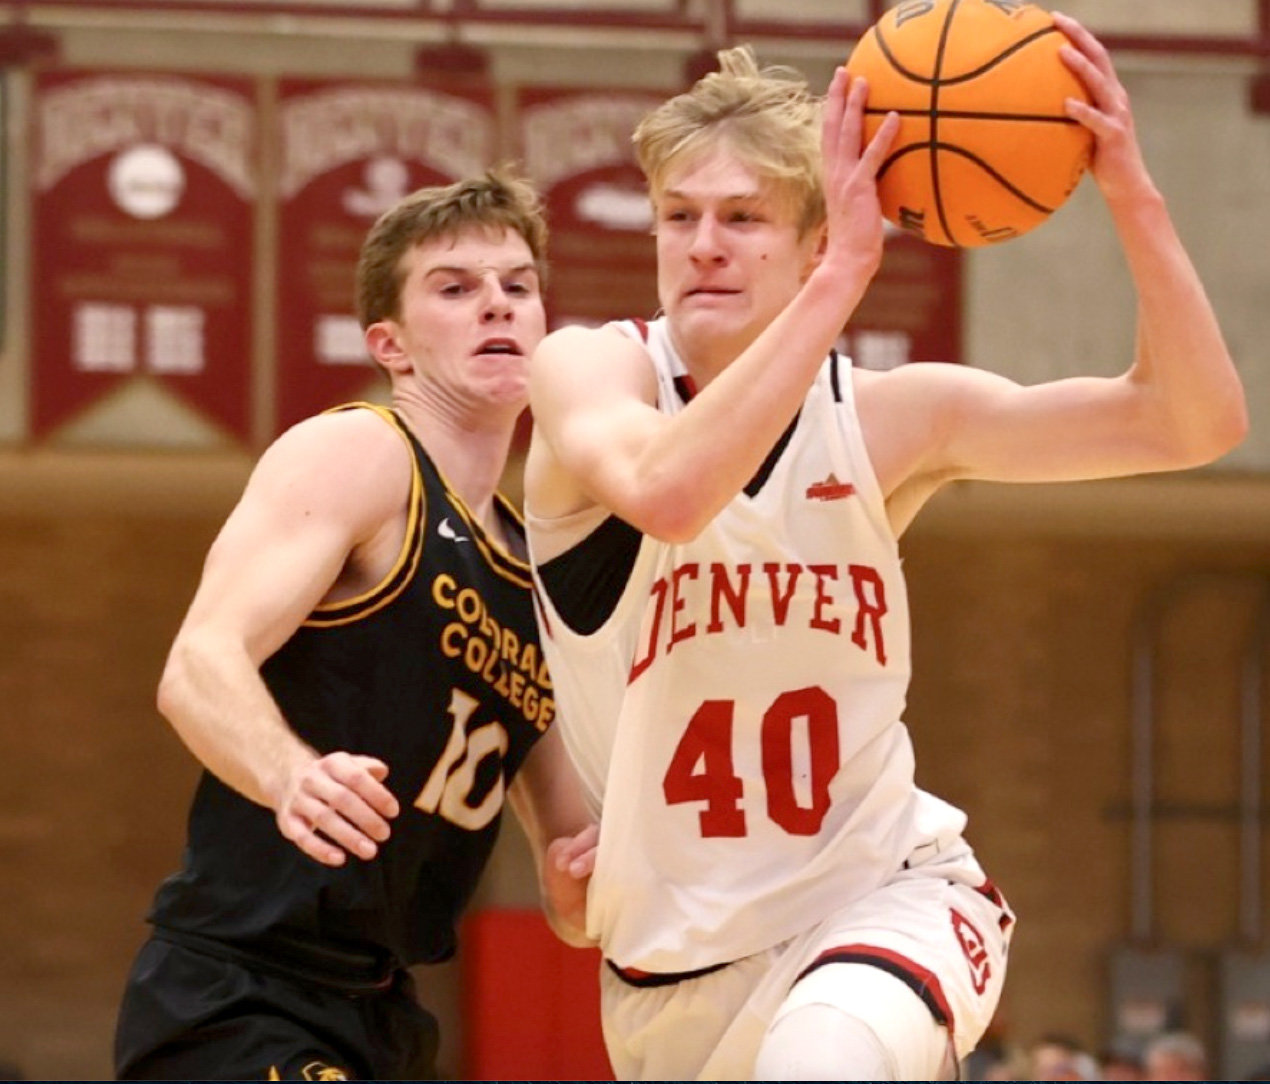 The Denver Pioneers Ben Bowen, son of former Fort Madison and Iowa standout Ryan Bowen will be playing at Western Illinois University on Saturday.